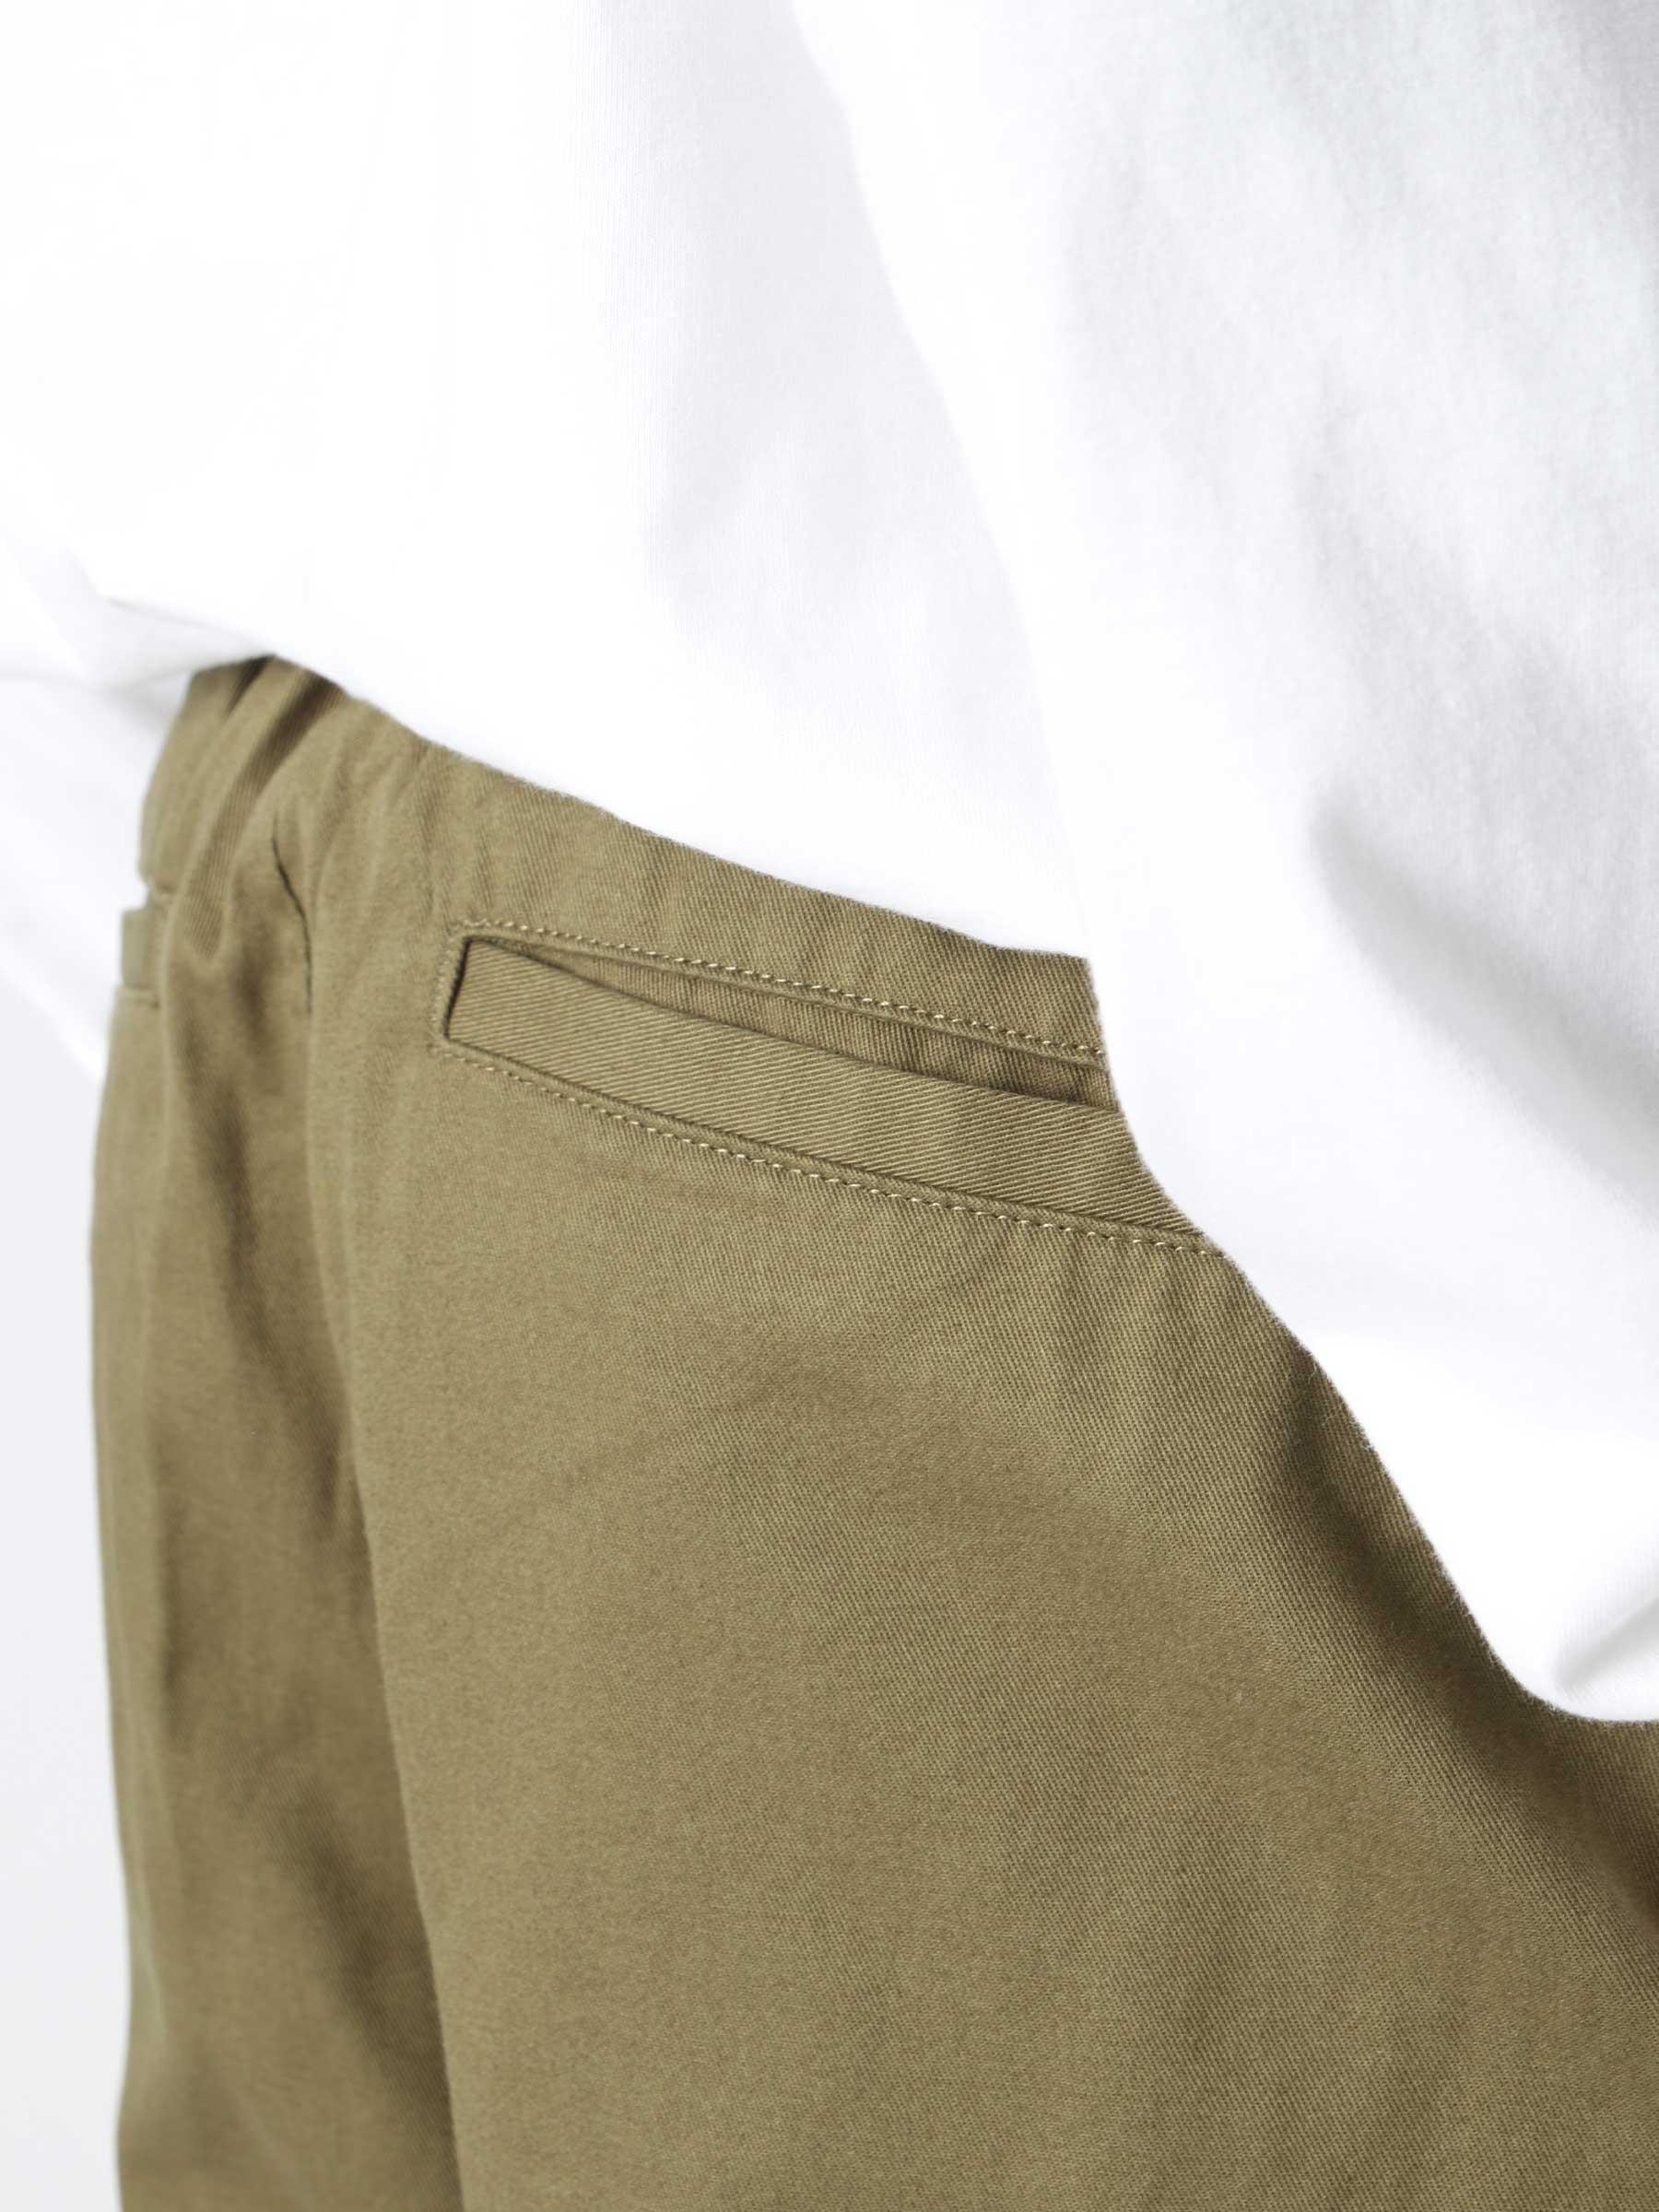 Easy Cargo Pant Pants Army Tent 142020189